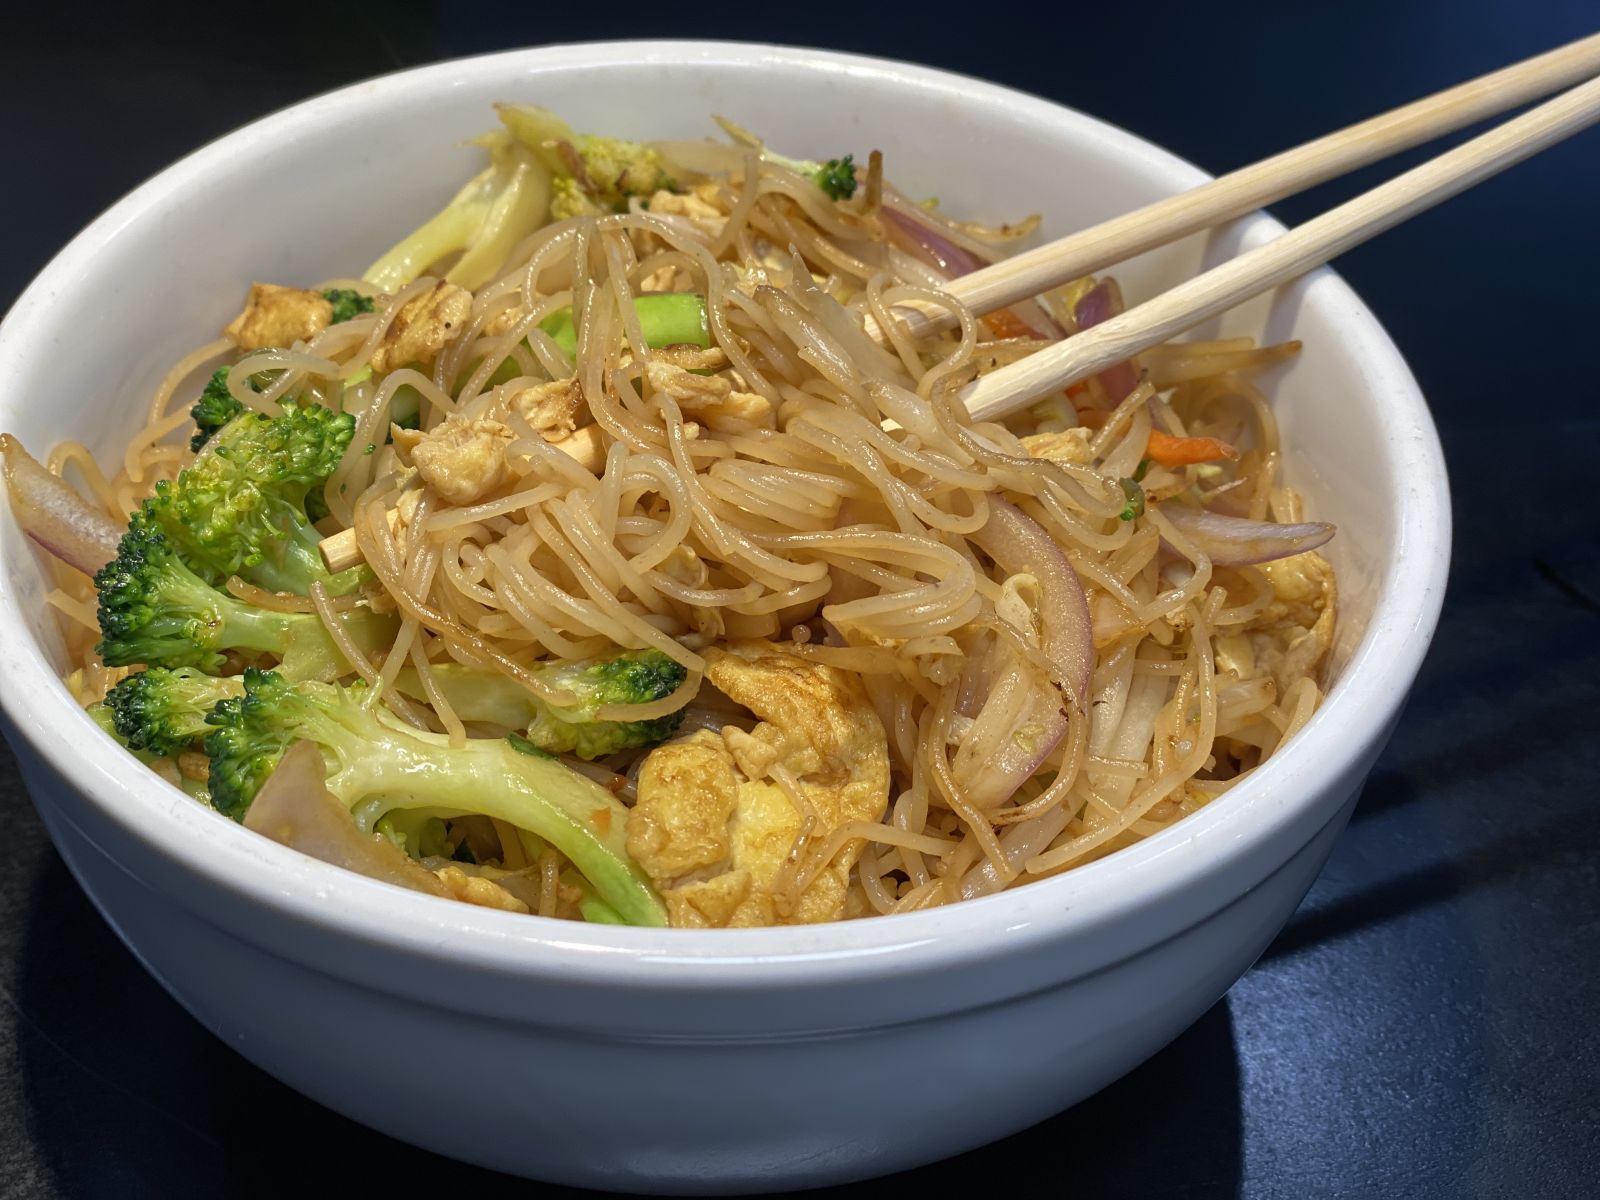 Lo mein from Hawthorne-based CHIGO, a new takeout/delivery foodservice model featuring fresh, local, and organic Chinese cuisine.